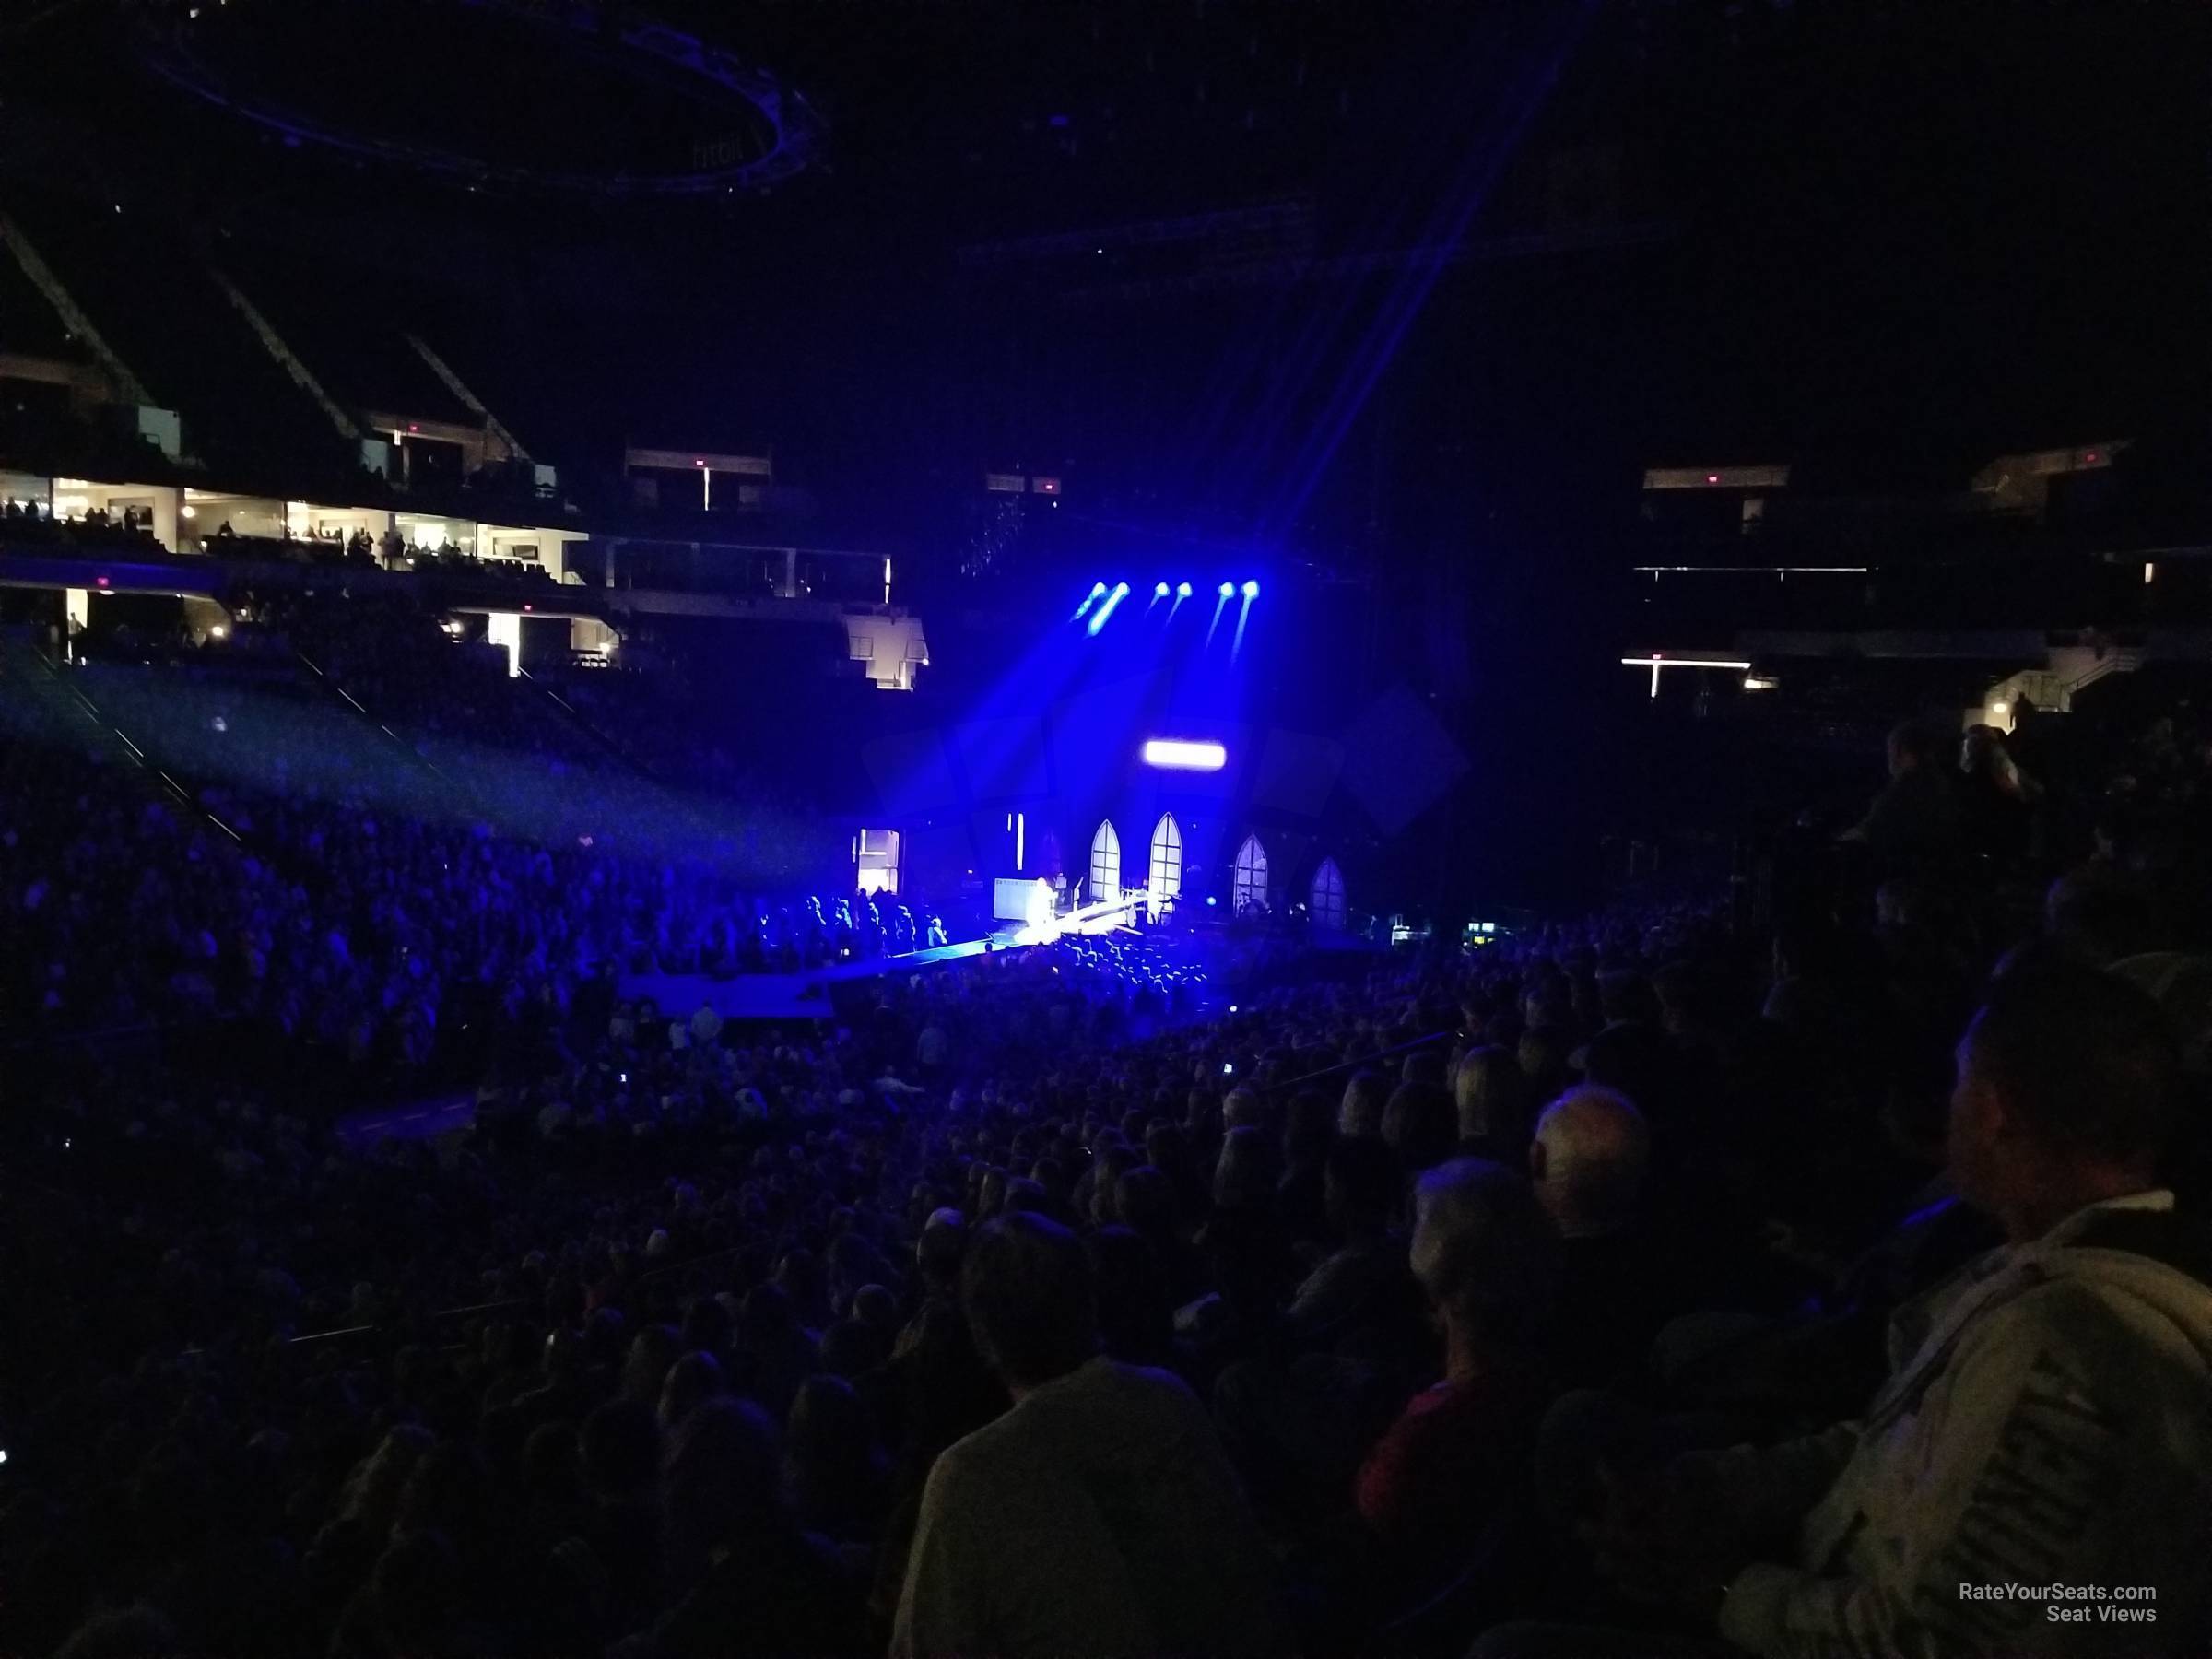 section 133, row u seat view  for concert - target center